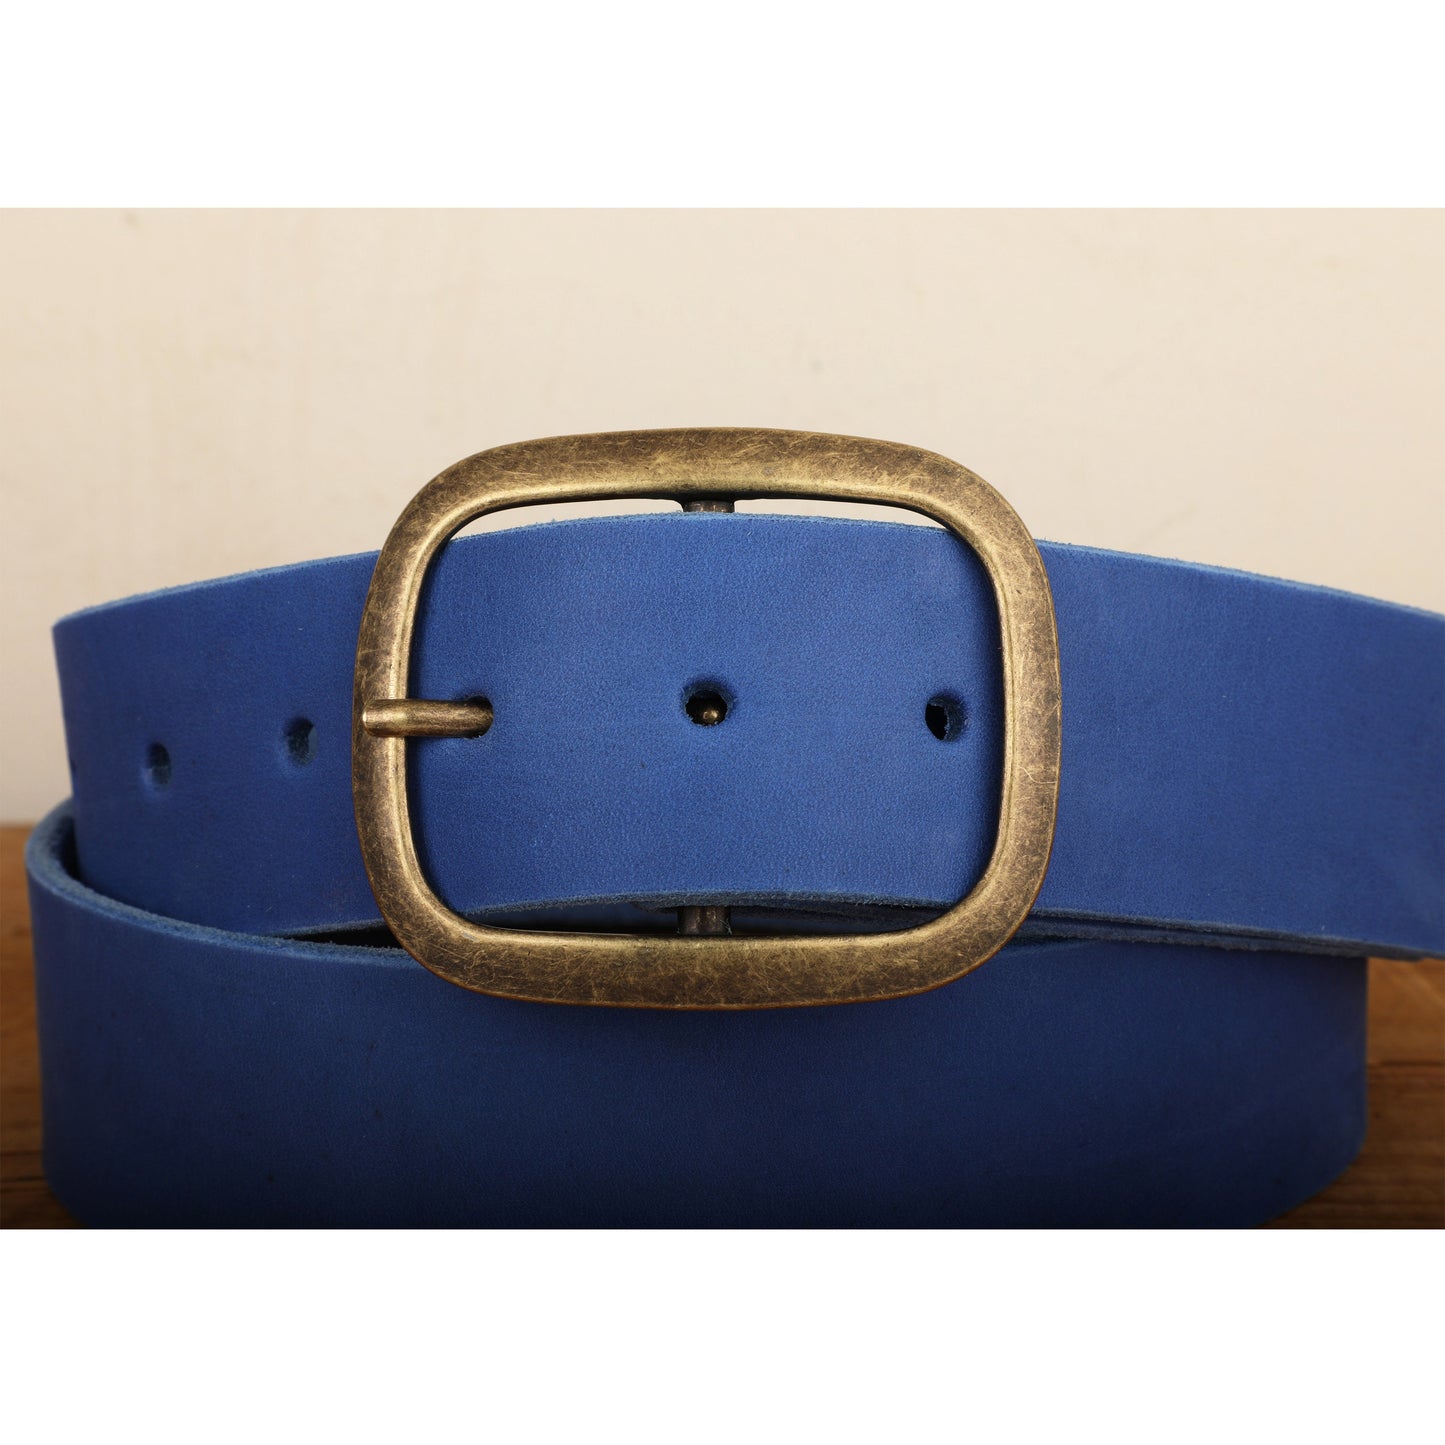 a blue belt with a gold buckle